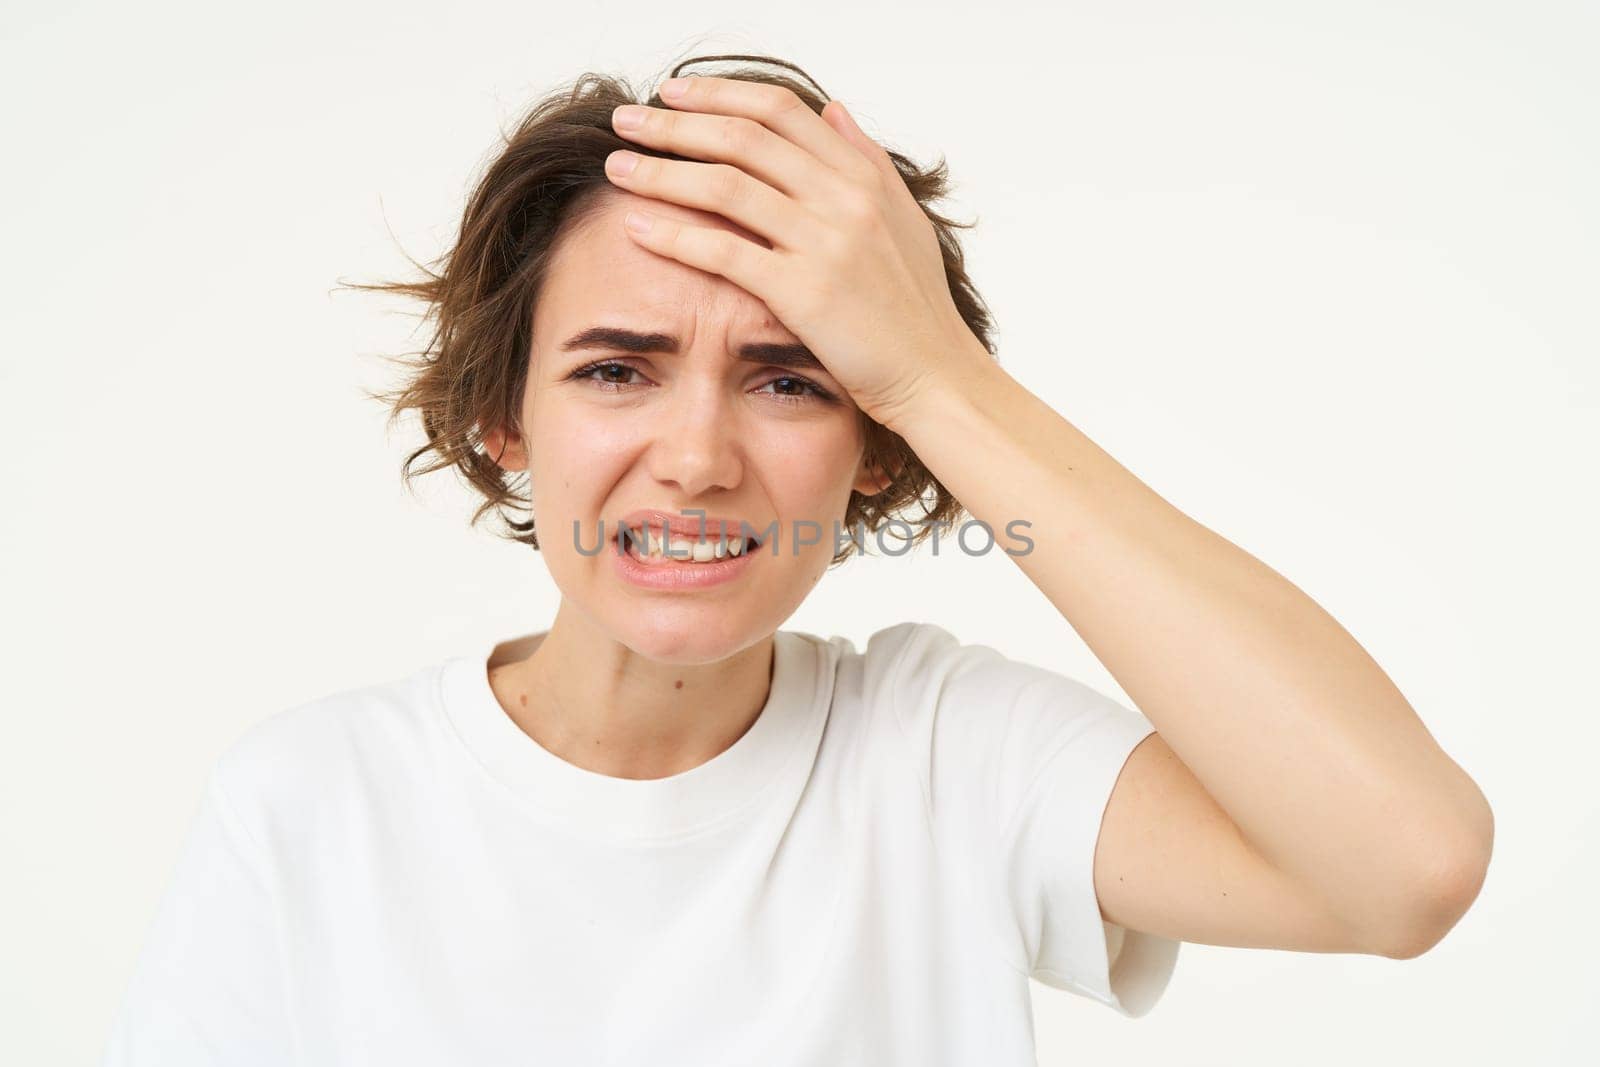 Portrait of woman touches her head, looks upset or disappointed, forgot something, has headache, migraine, standing over white background.